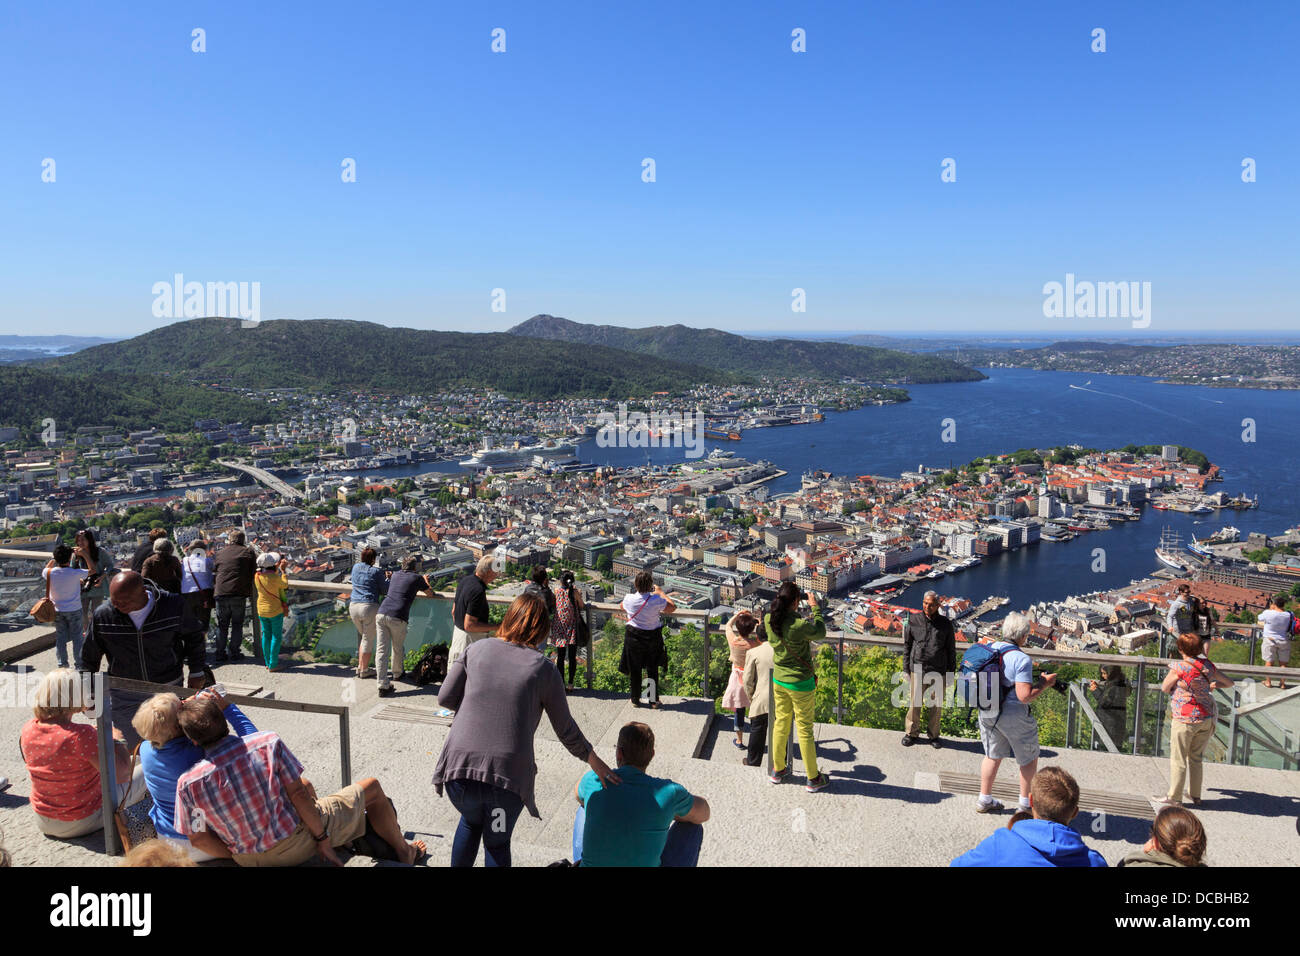 Tourists with view of city and coastline at busy viewpoint on Mount Floyen, Bergen, Hordaland, Norway, Scandinavia Stock Photo